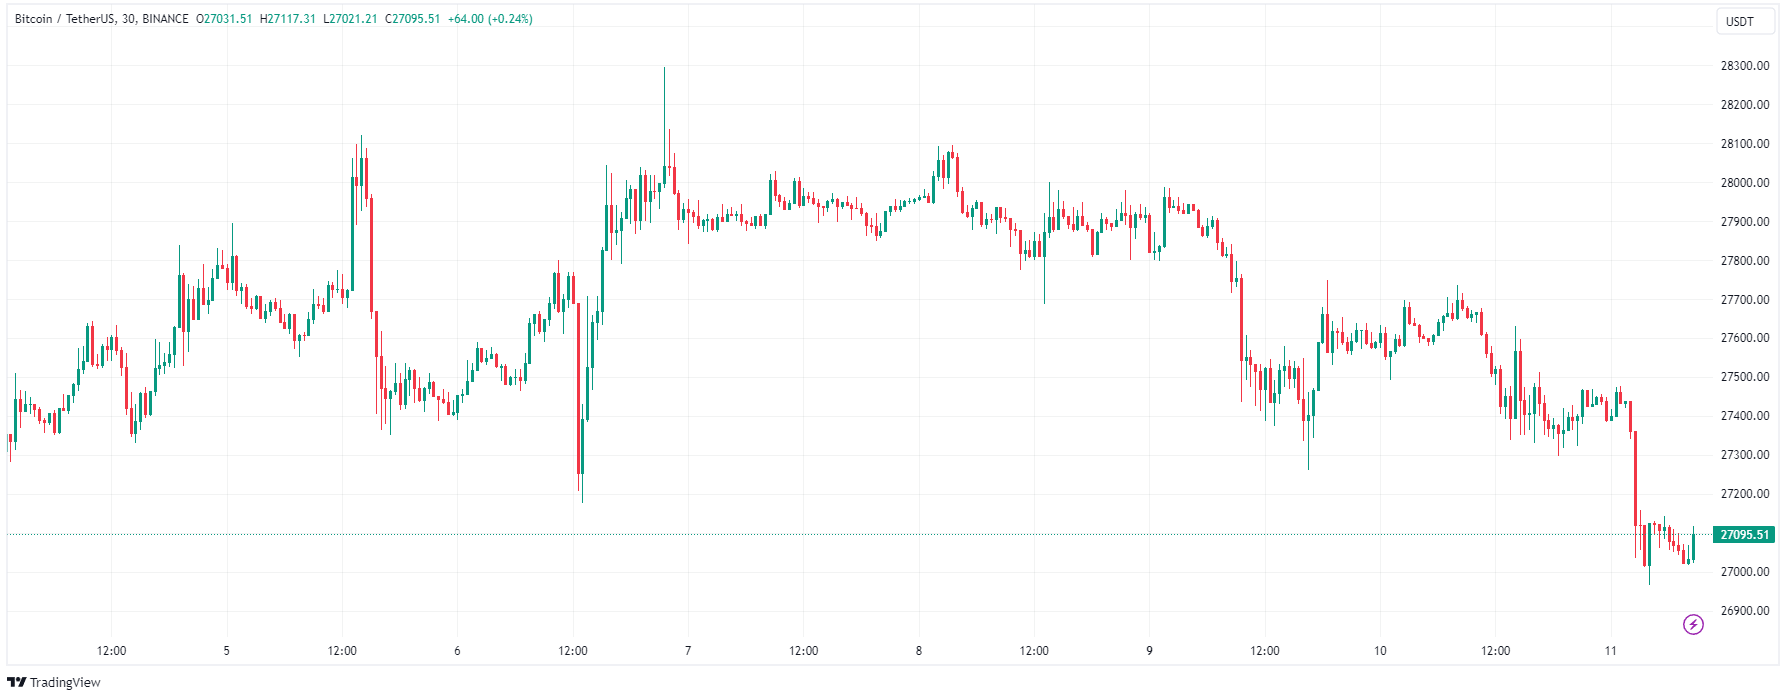 Bitcoin (BTC) Price Prediction: BTC to Hit $100,000 Amid Market Fluctuations, but is Another Presale Coin a Better Bet?